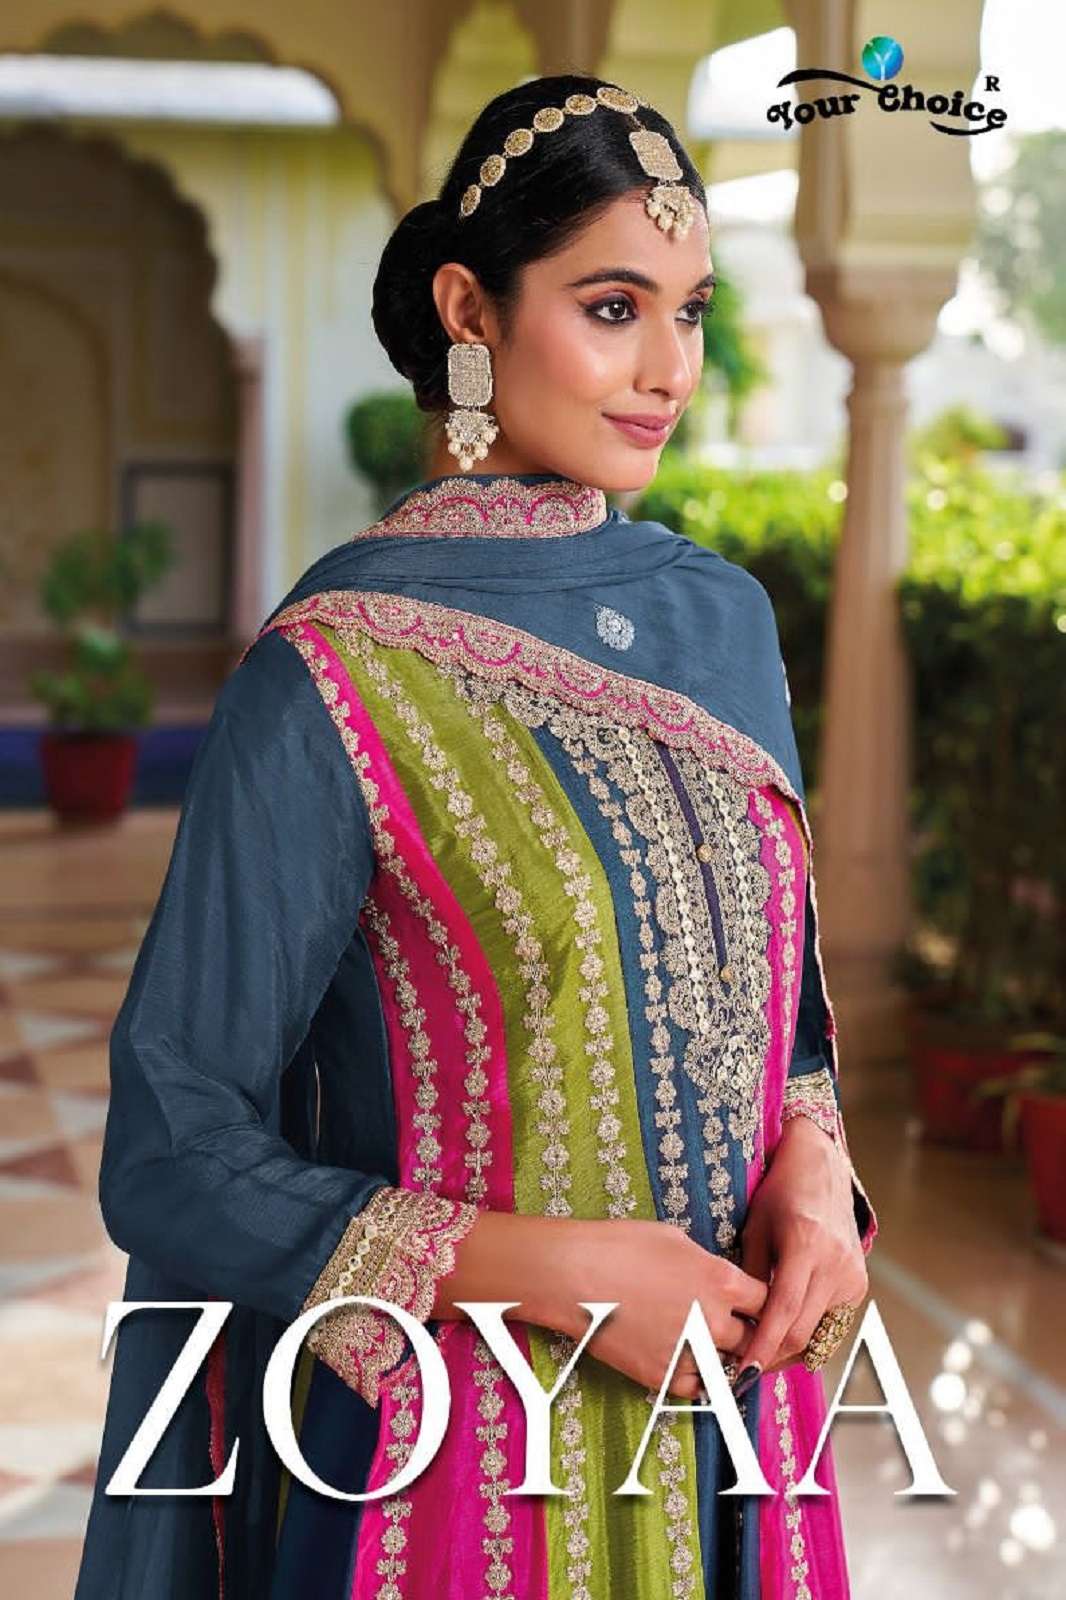 Your Choice Zoyaa Traditional Lady Hit Designer Party Festival & Wedding Wear Salwar Suit Collection